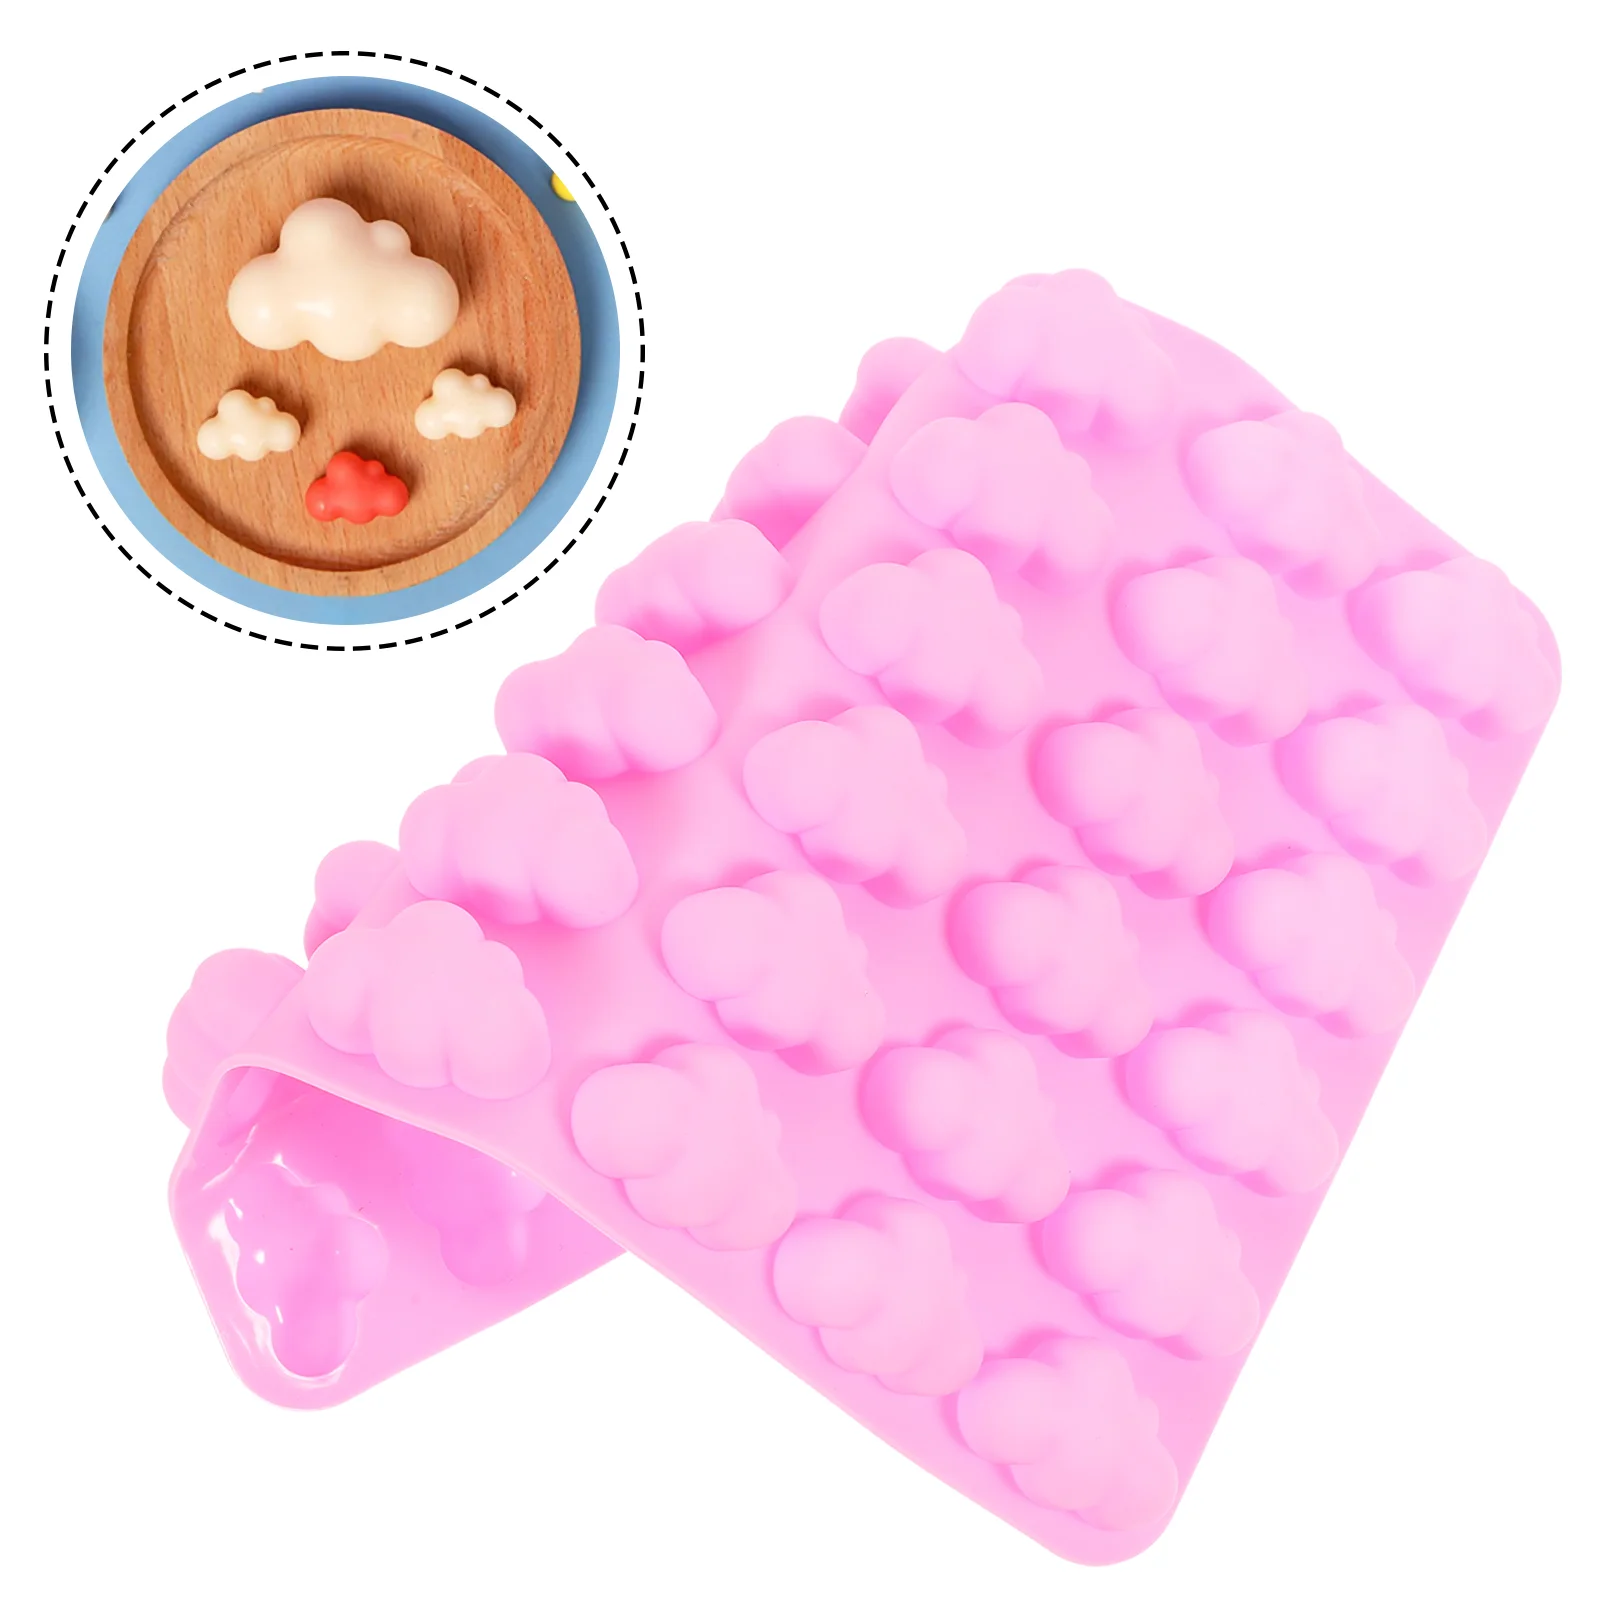 

Cloud Silicone Mold Chocolate Candy Molds Mould Multifunction Non- Stick Baking Silica Gel Pudding Epoxy Resin Molds Baby